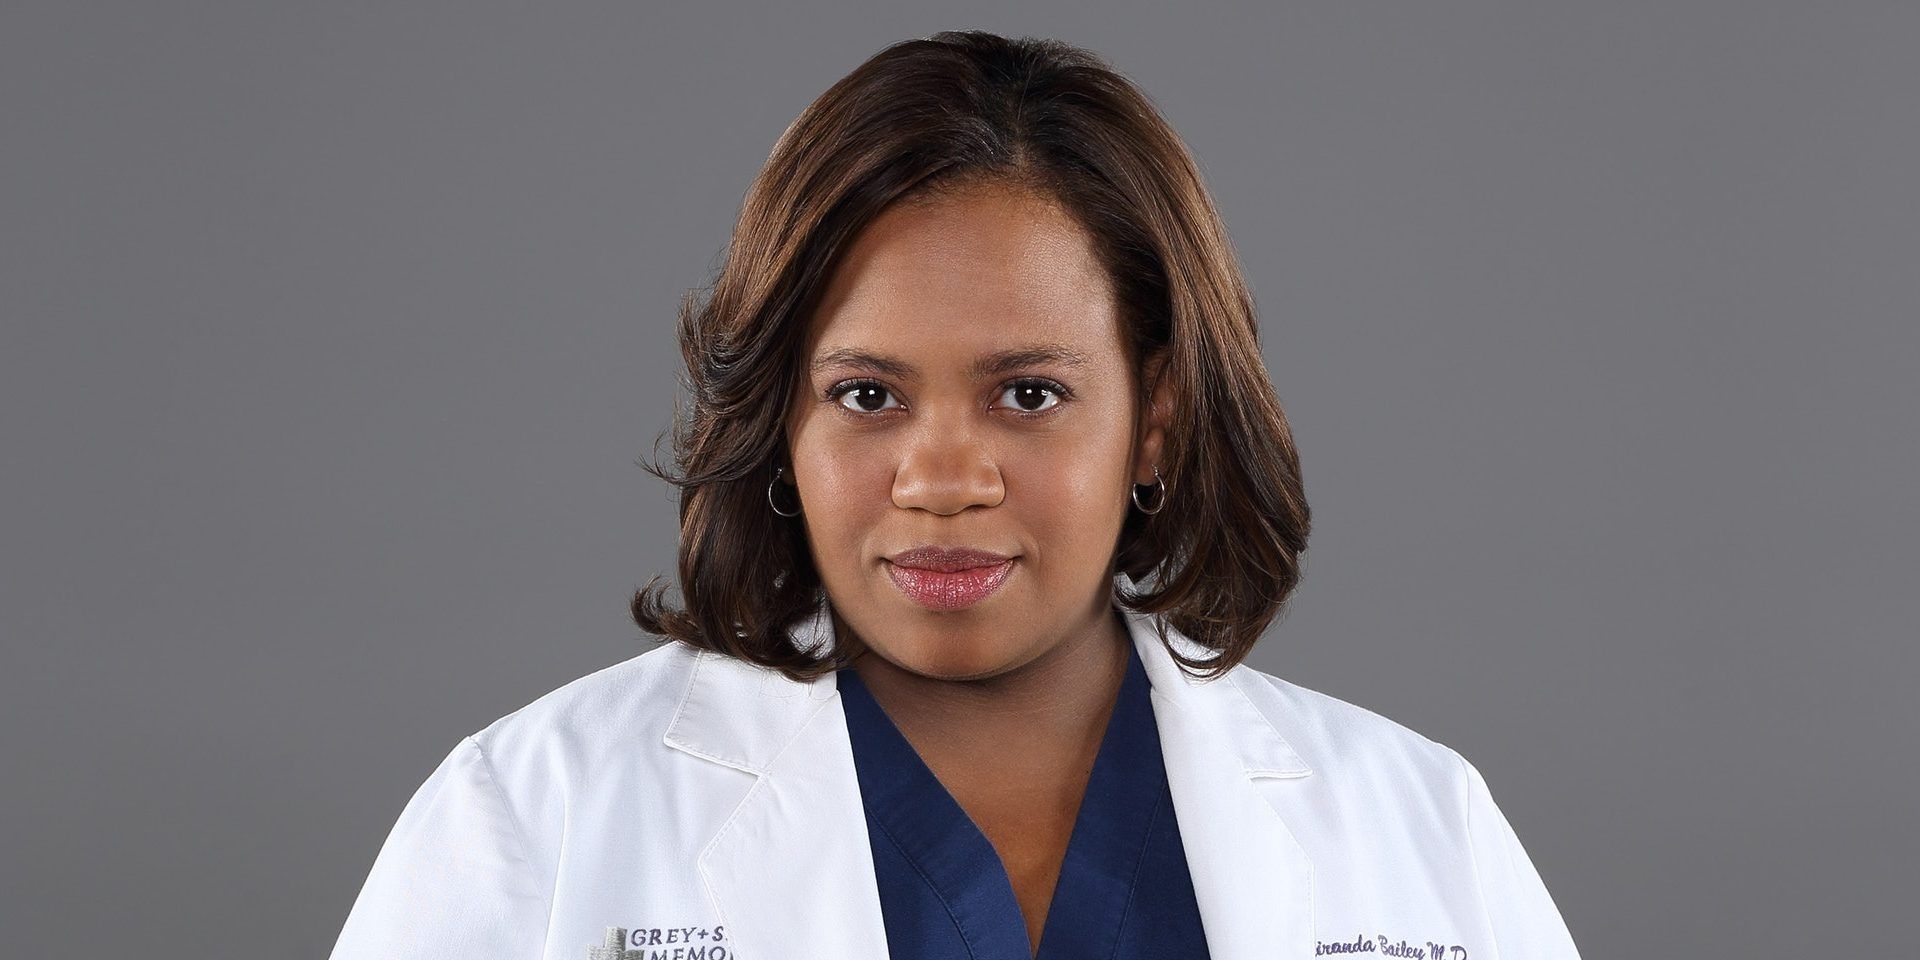 Miranda Bailey smiling in front of a grey background